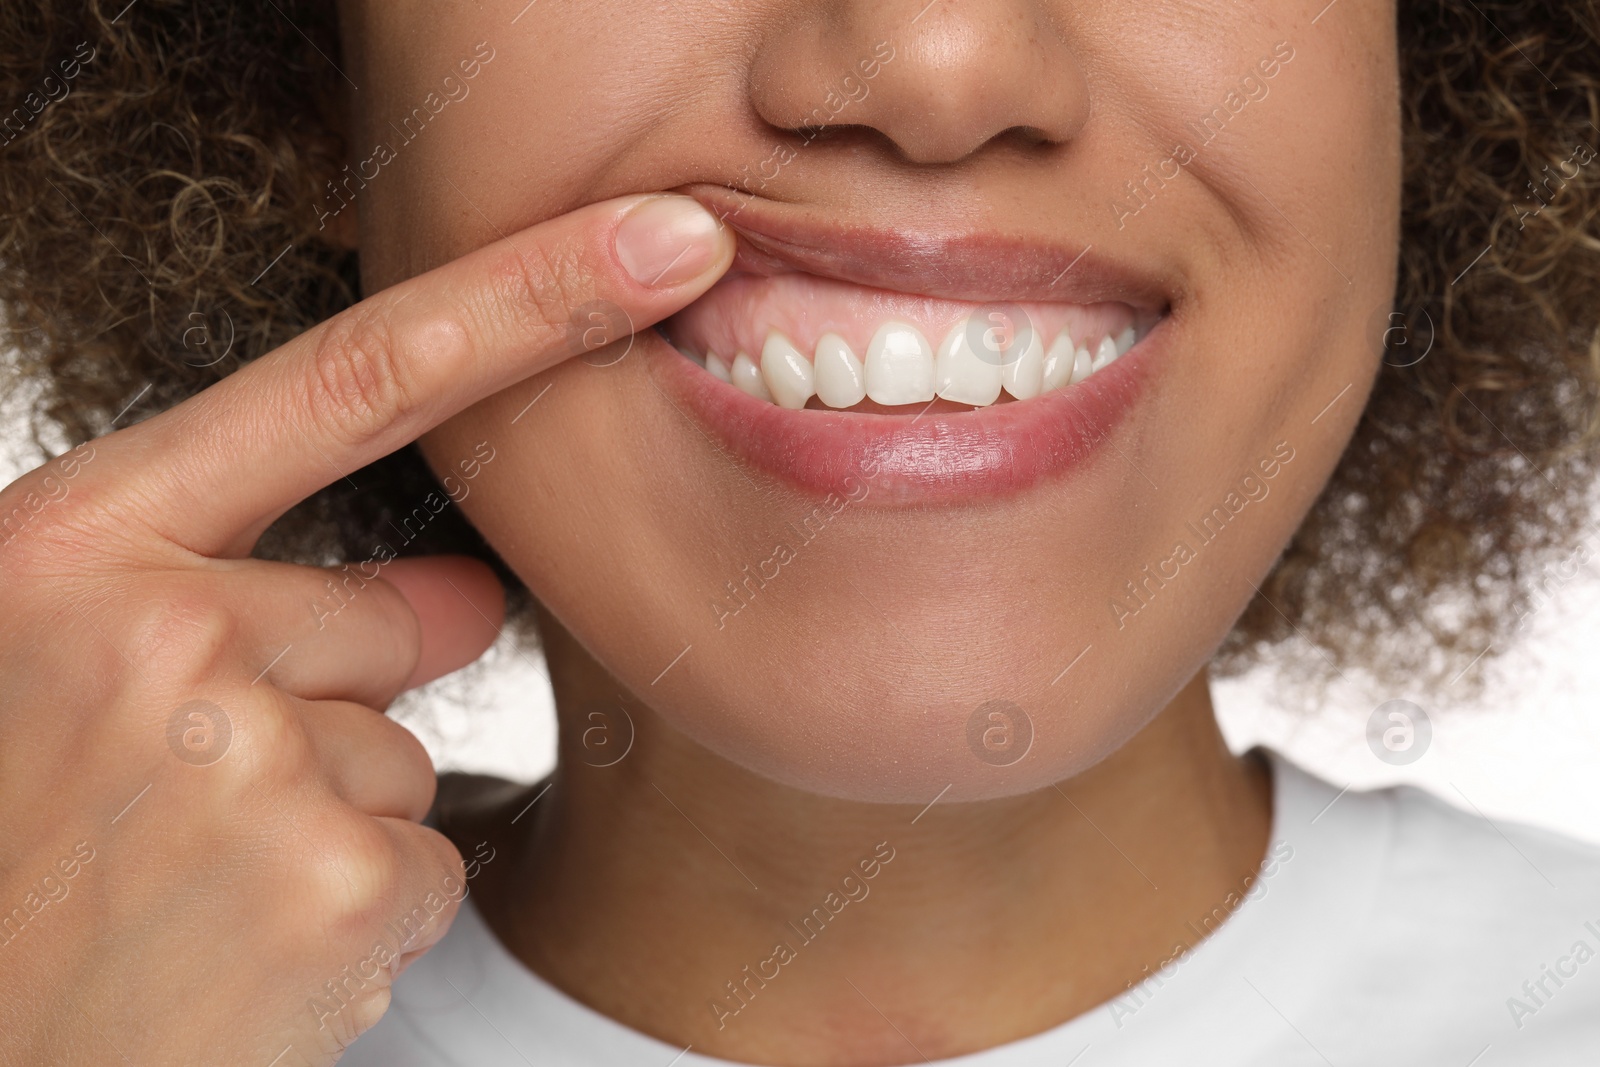 Photo of Woman showing her clean teeth, closeup view